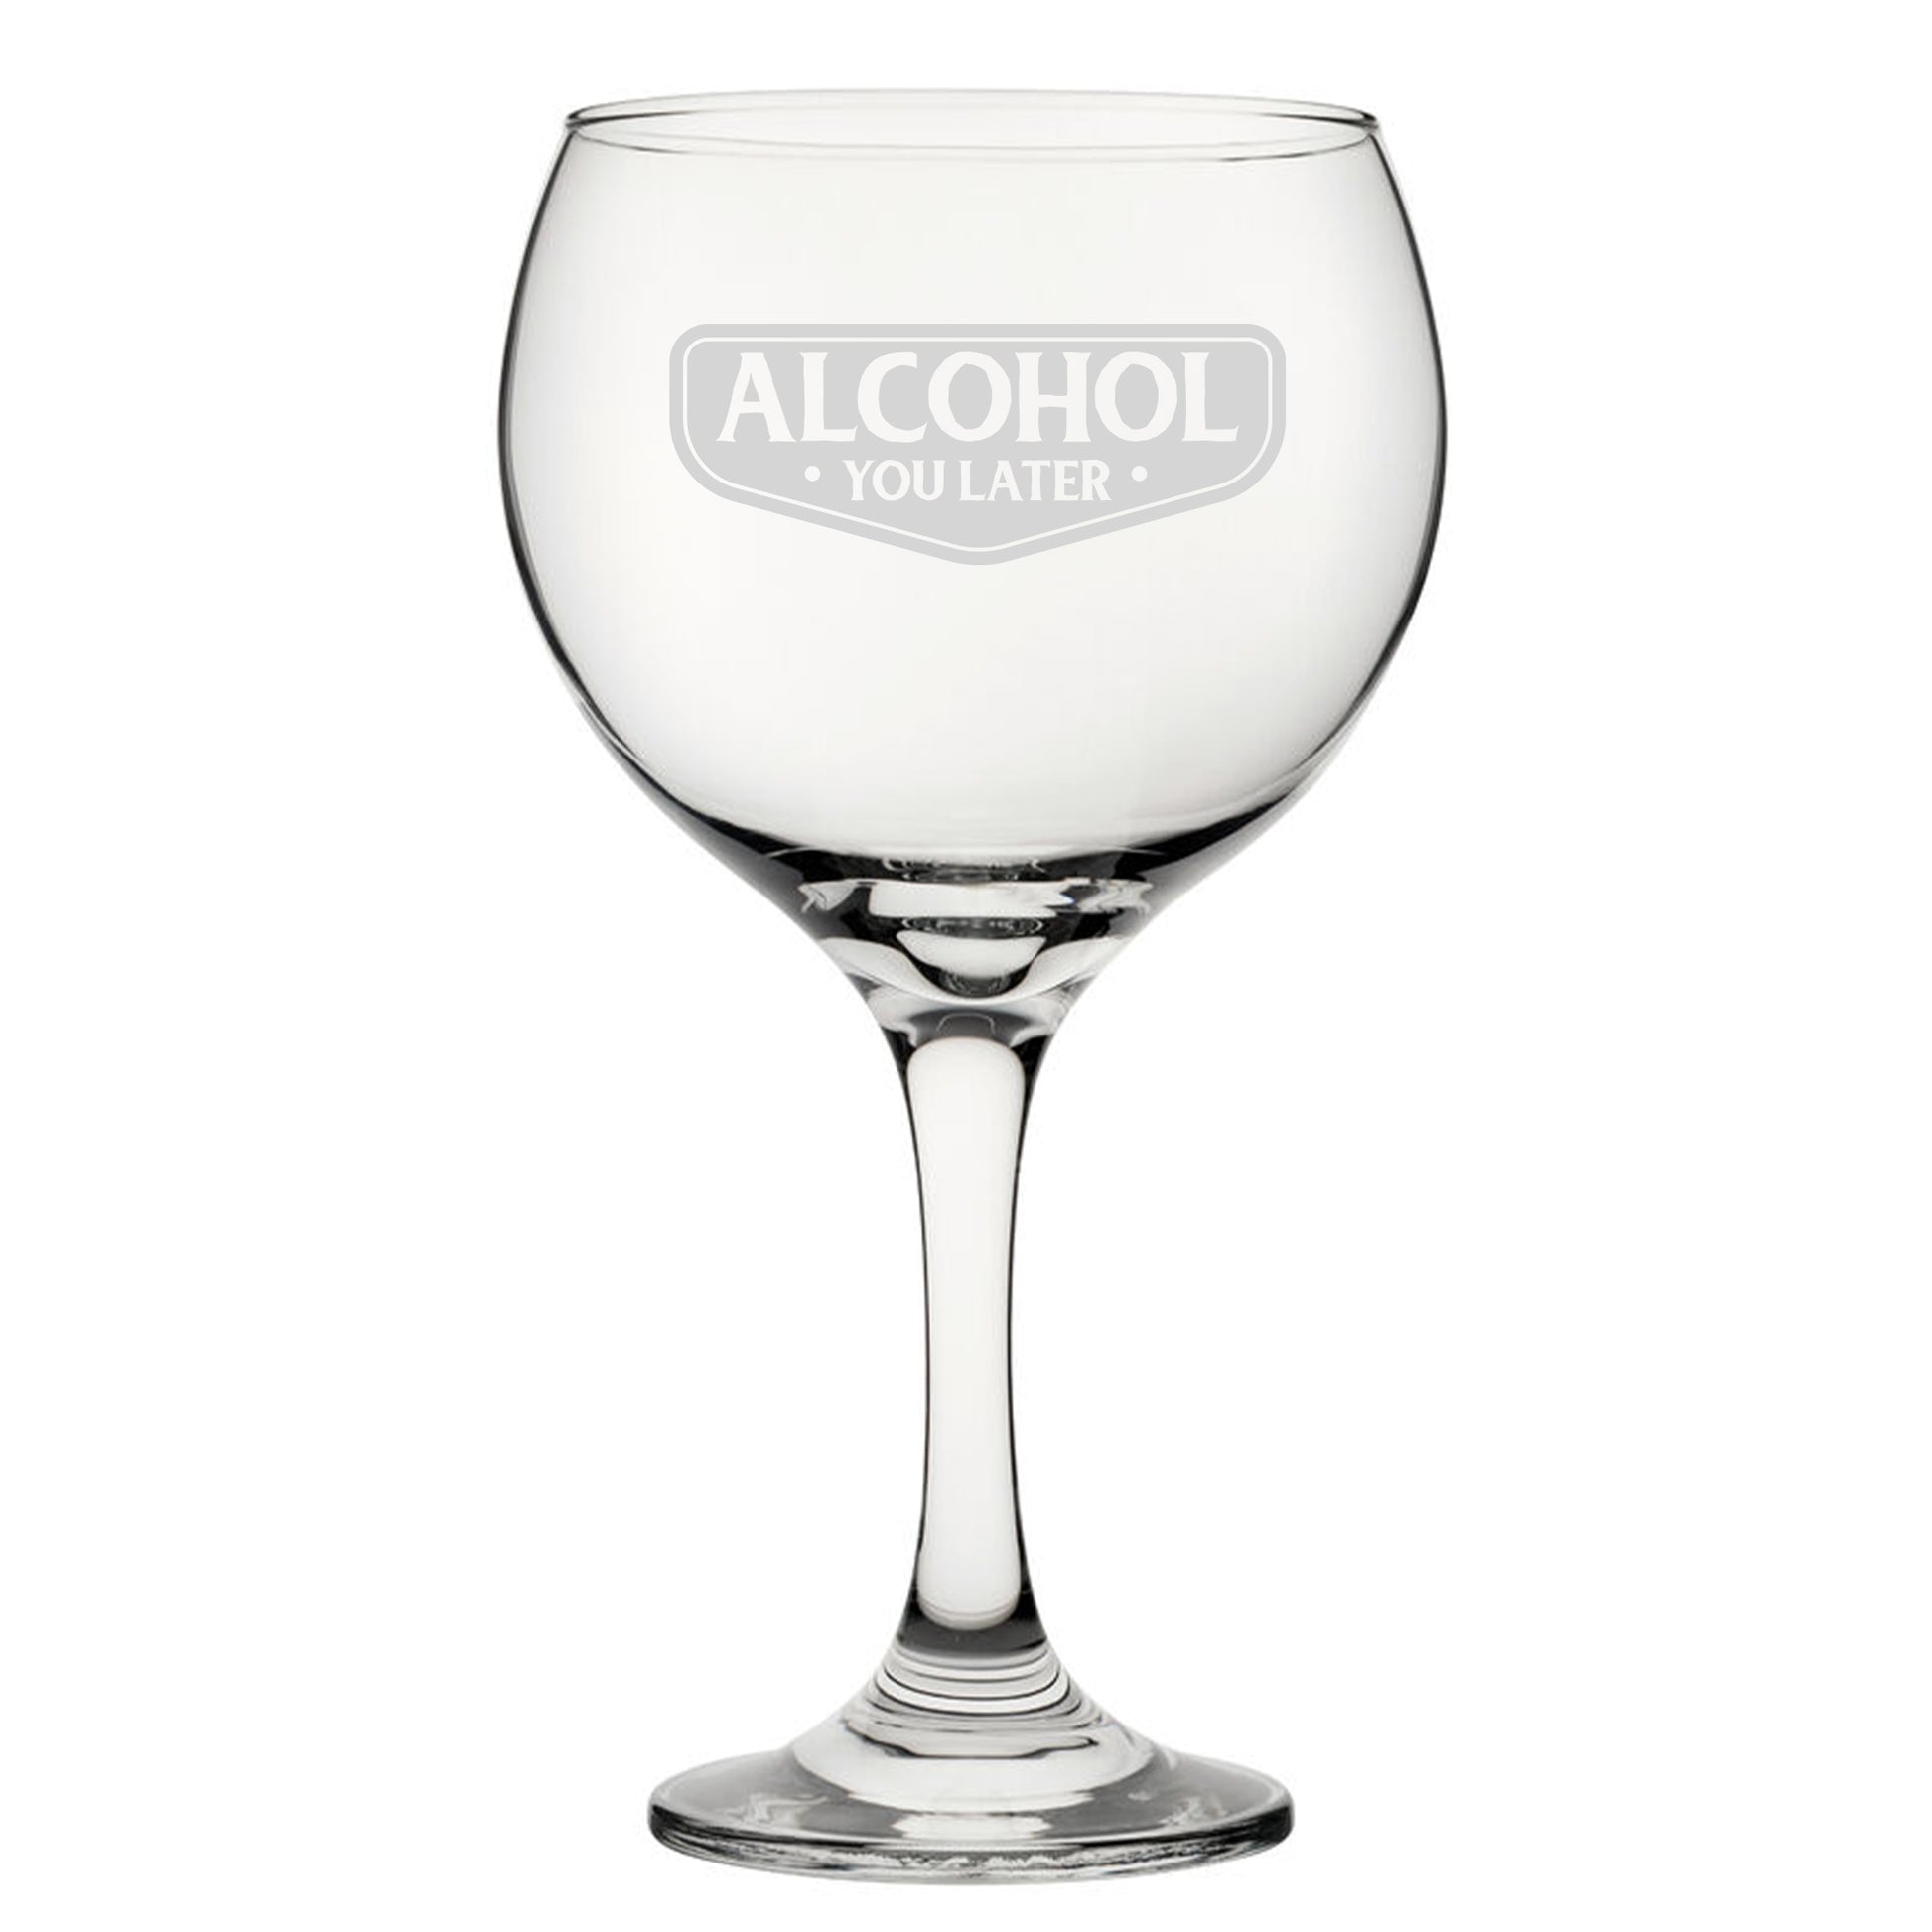 Alcohol You Later - Engraved Novelty Gin Balloon Cocktail Glass Image 2